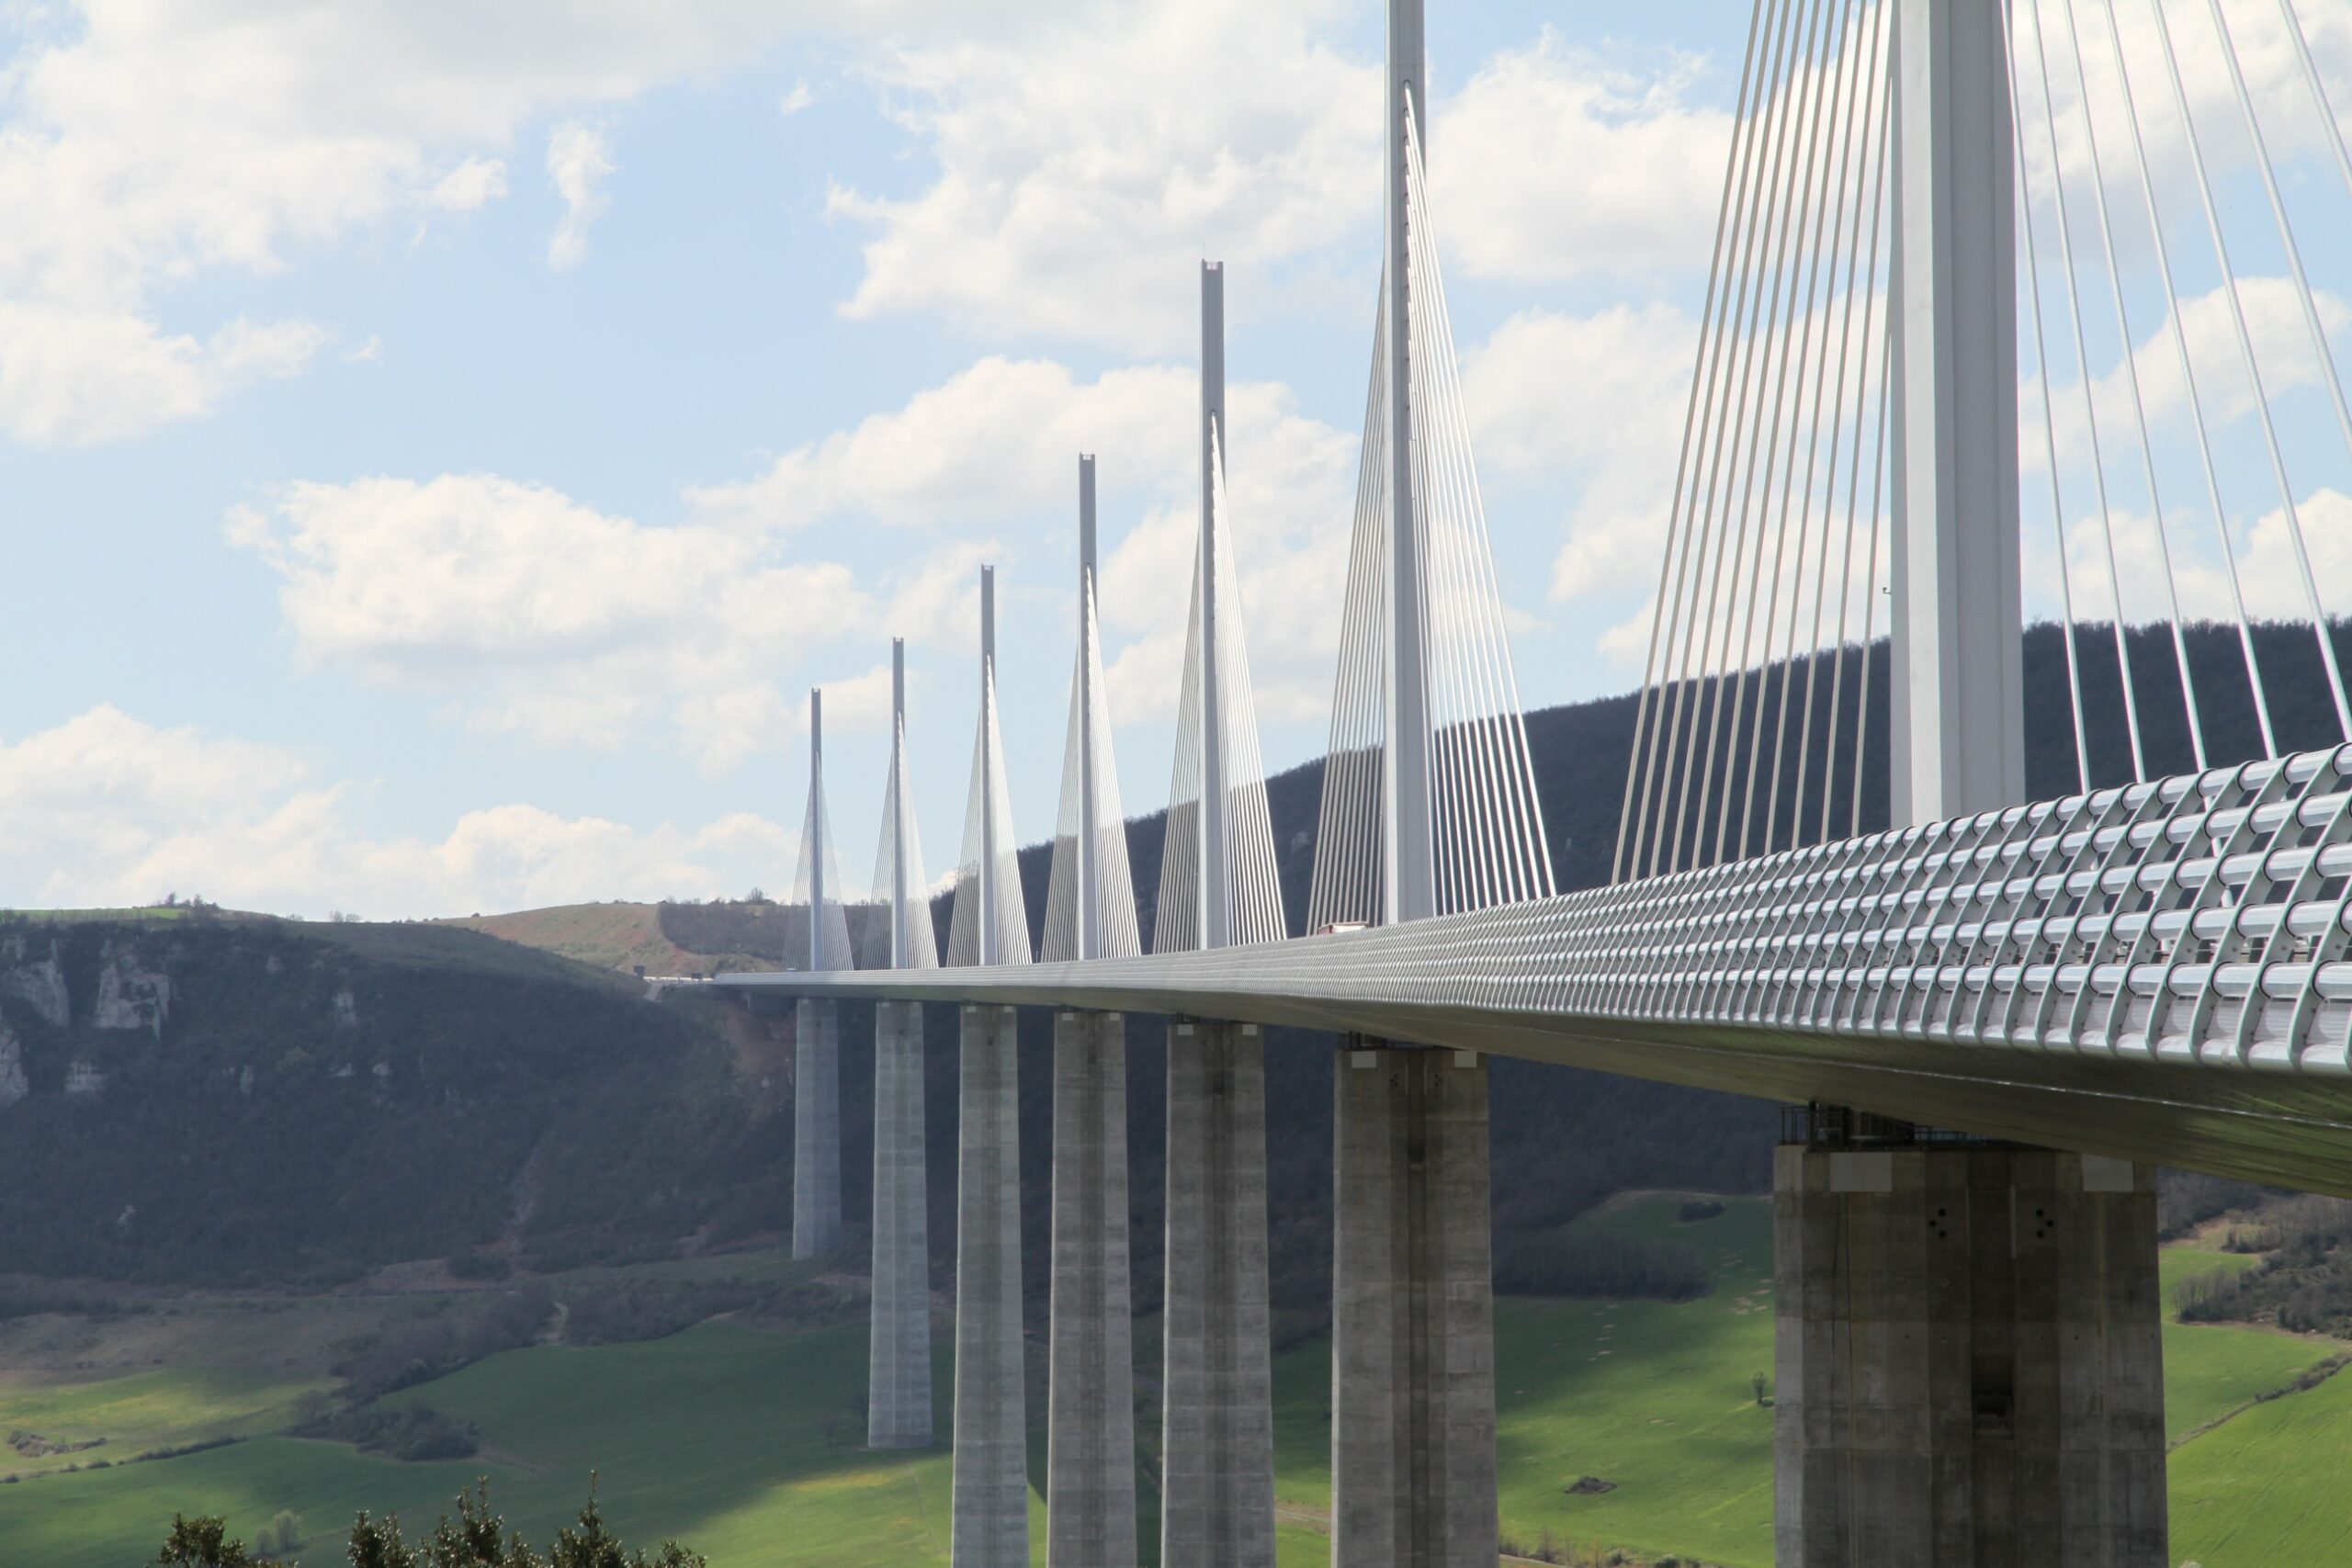 An enormous concrete cable stated bridge spanning a large valley